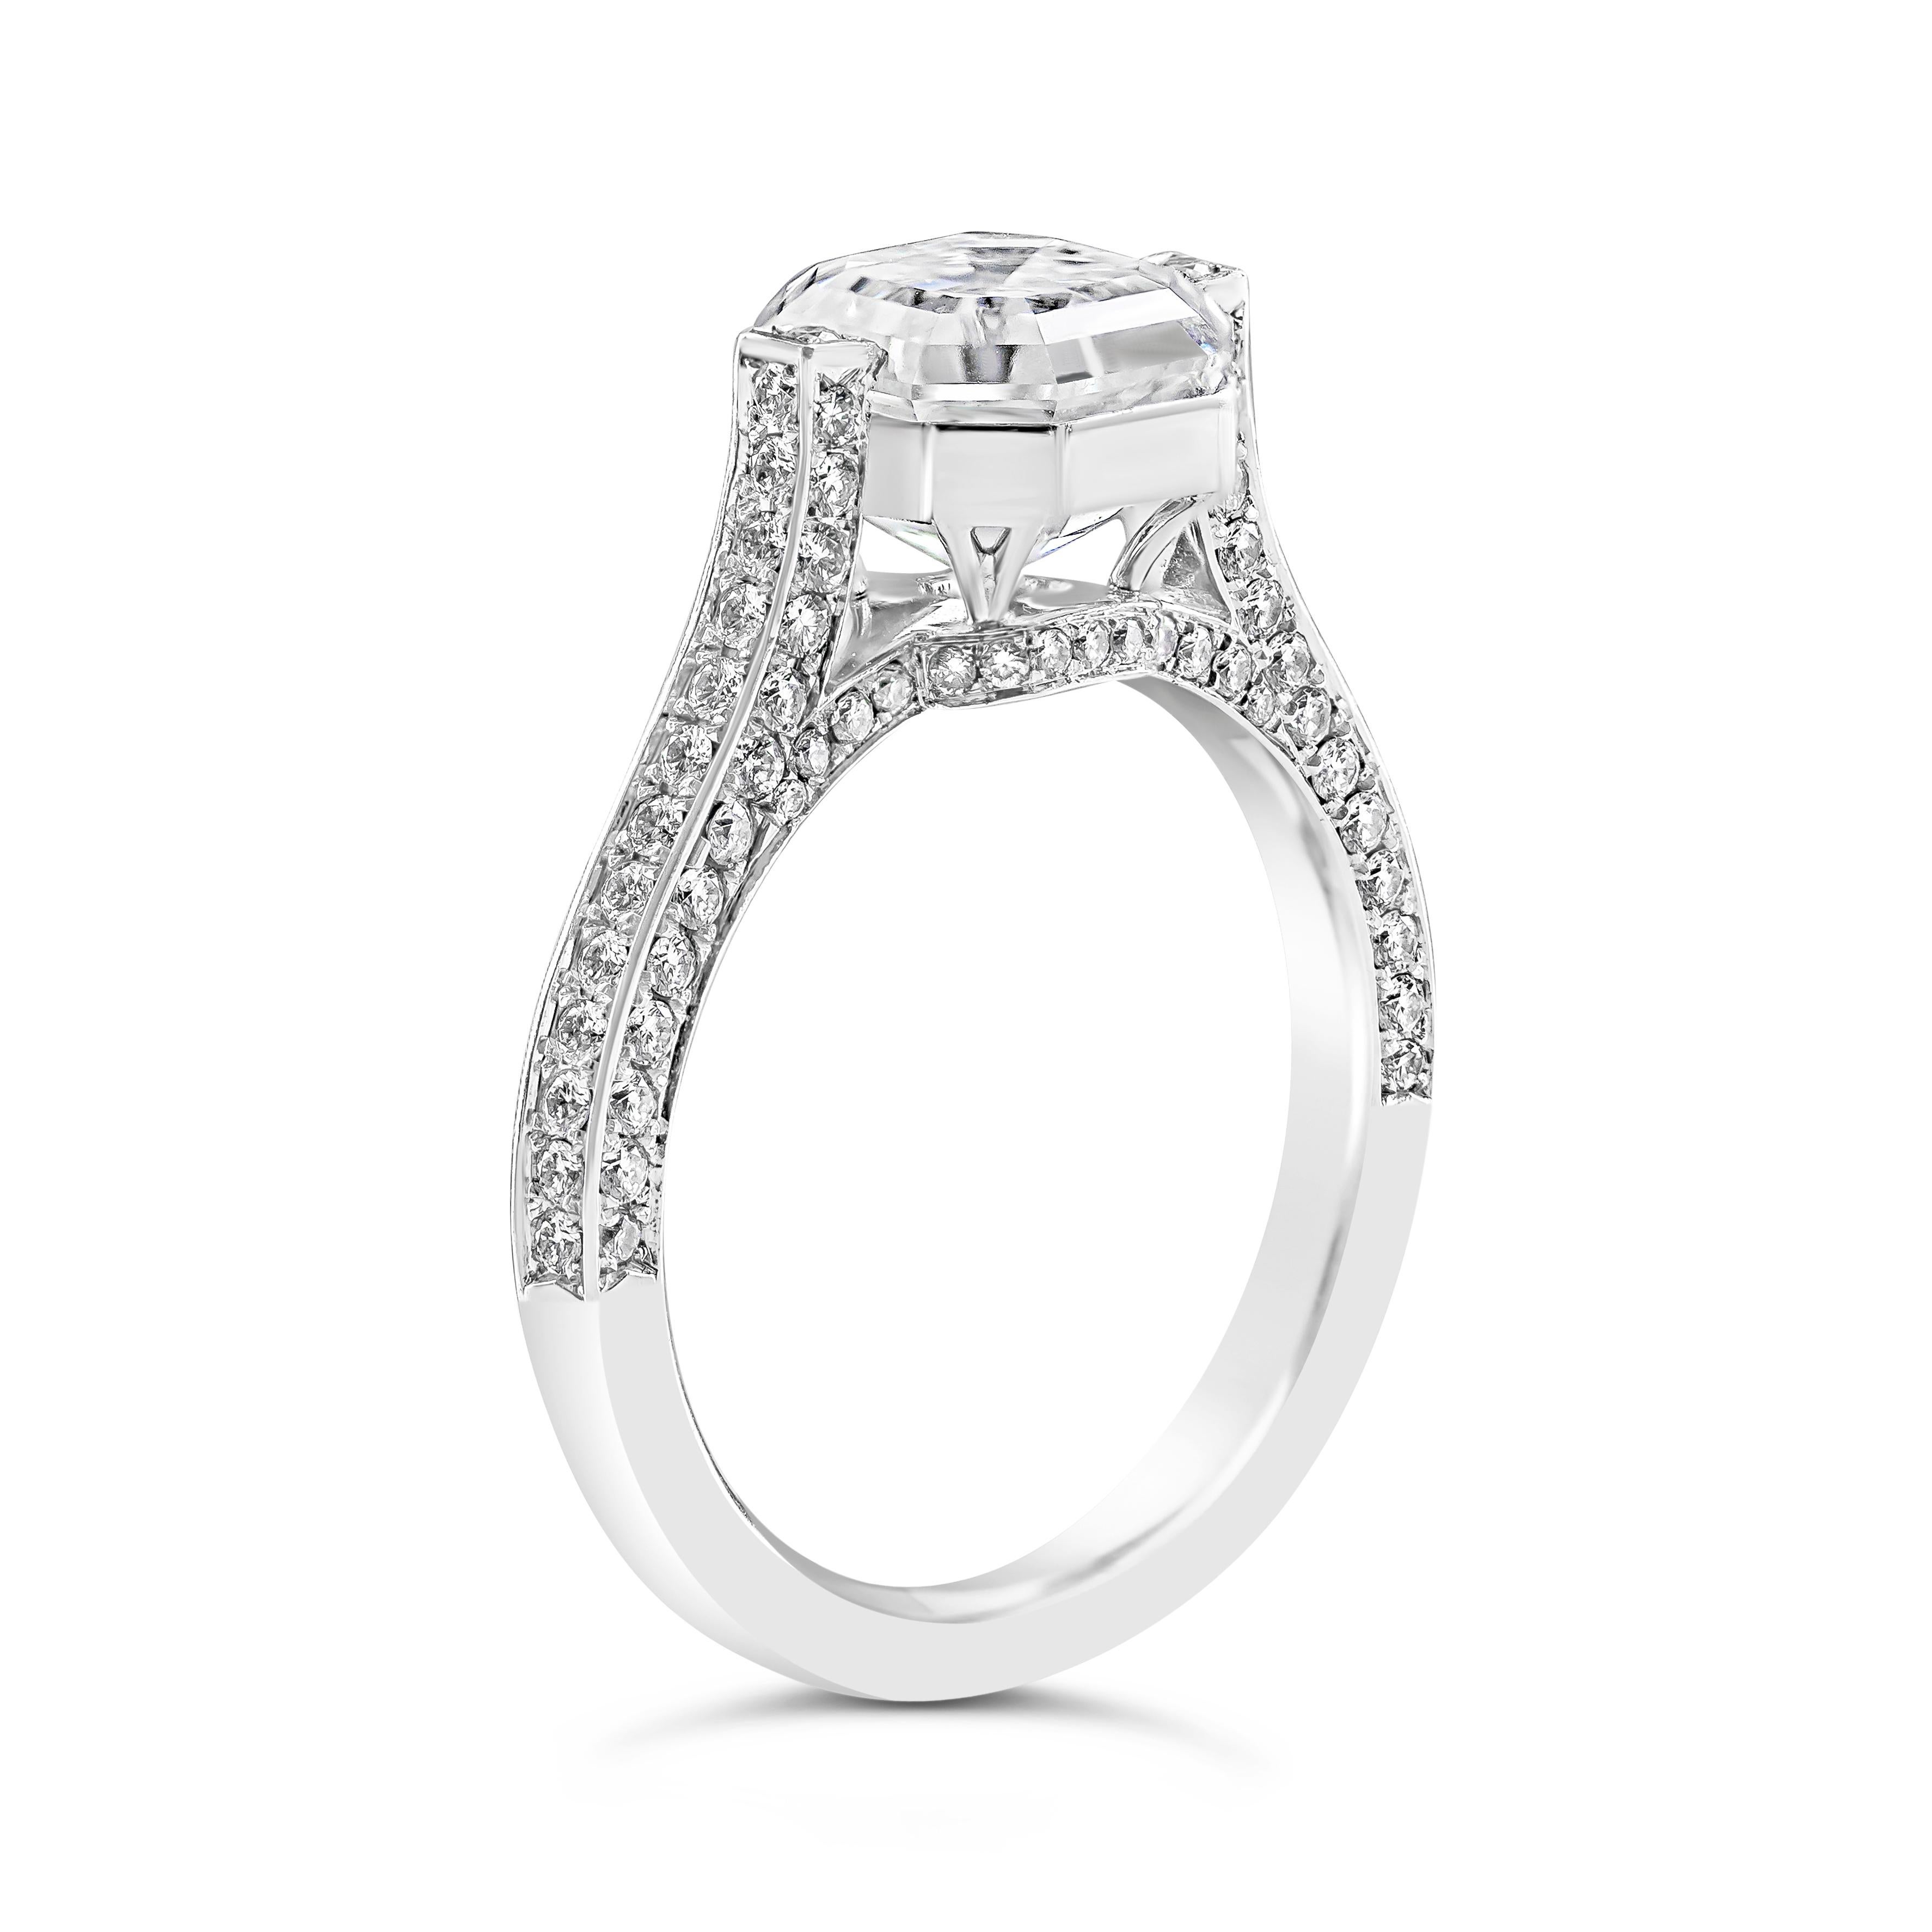 Showcases a 3.01 carats asscher cut diamond certified by GIA as G color and VS1 in clarity. Set in an invisible platinum basket underneath the diamond securely set on each side to give a floating effect. Set on a diamond encrusted shank on three